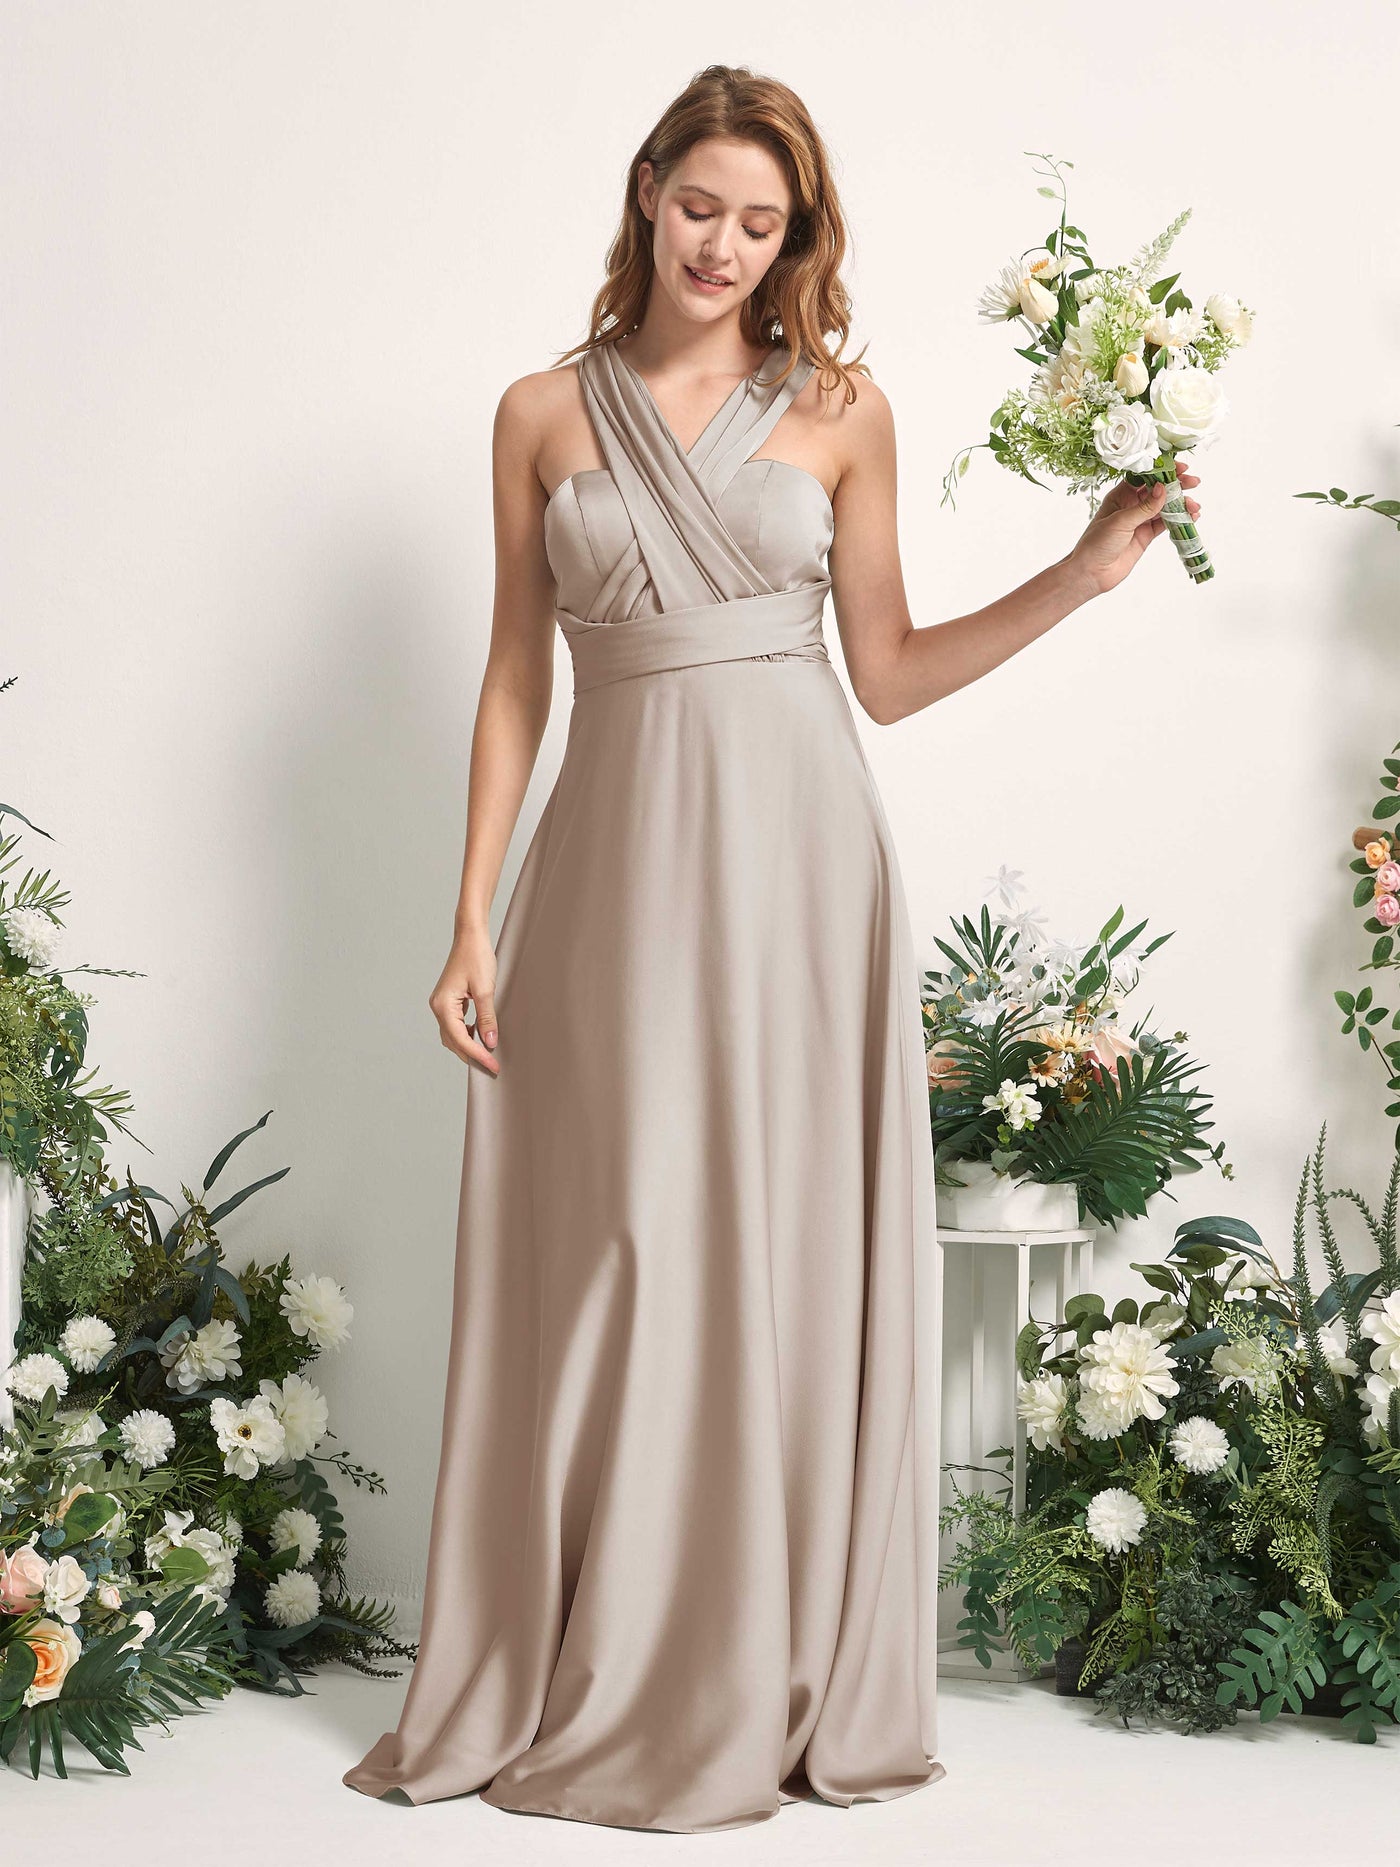 Taupe Bridesmaid Dresses Bridesmaid Dress A-line Satin Halter Full Length Short Sleeves Wedding Party Dress (81226402)#color_taupe